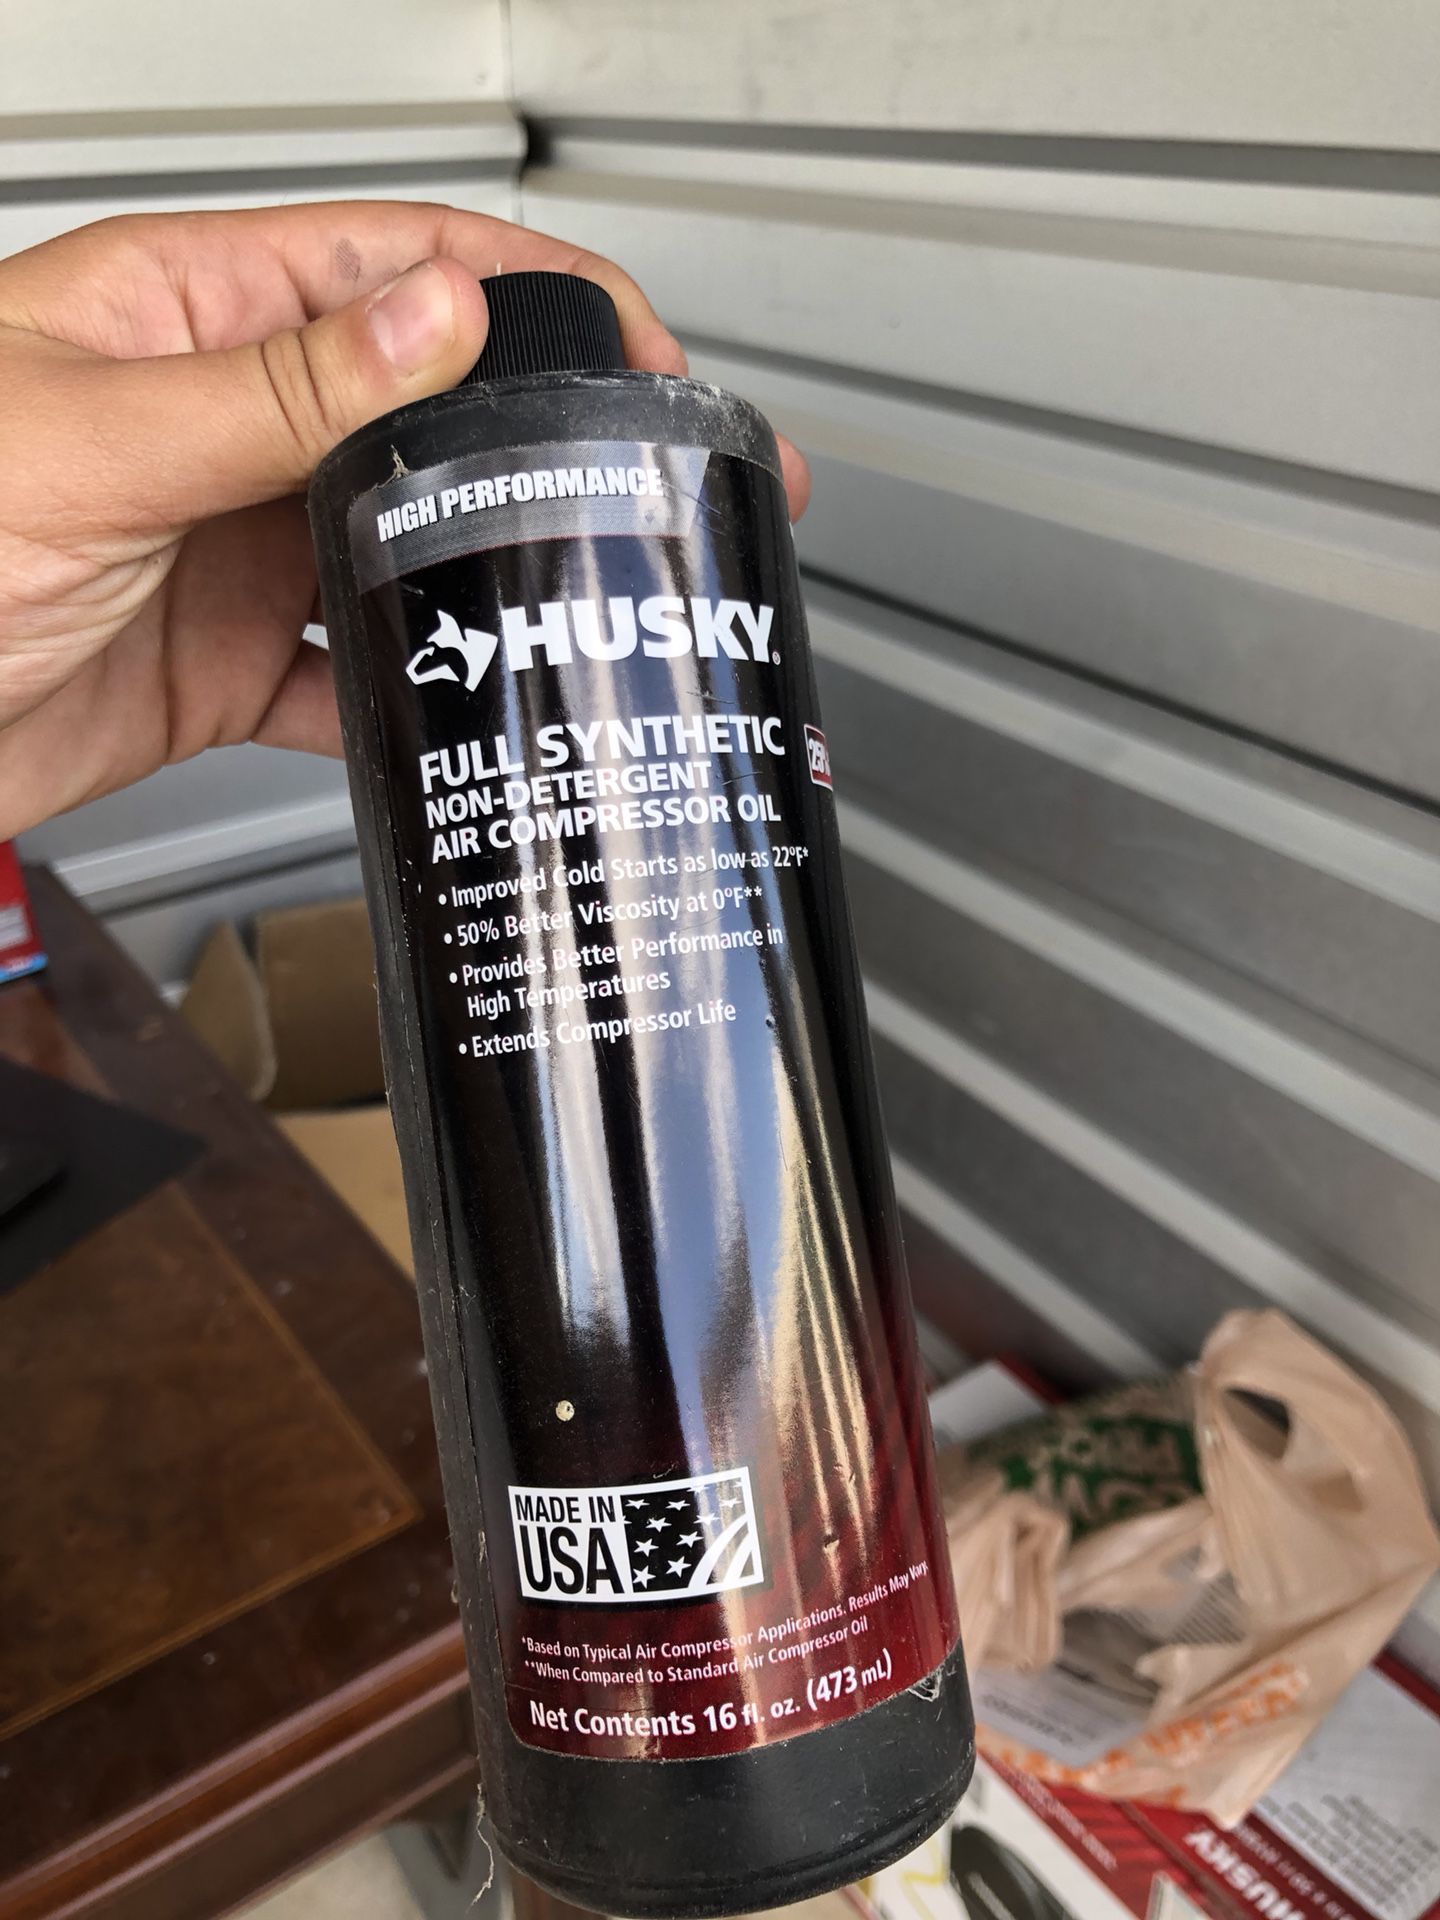 Full synthetic non detergent air compressor oil